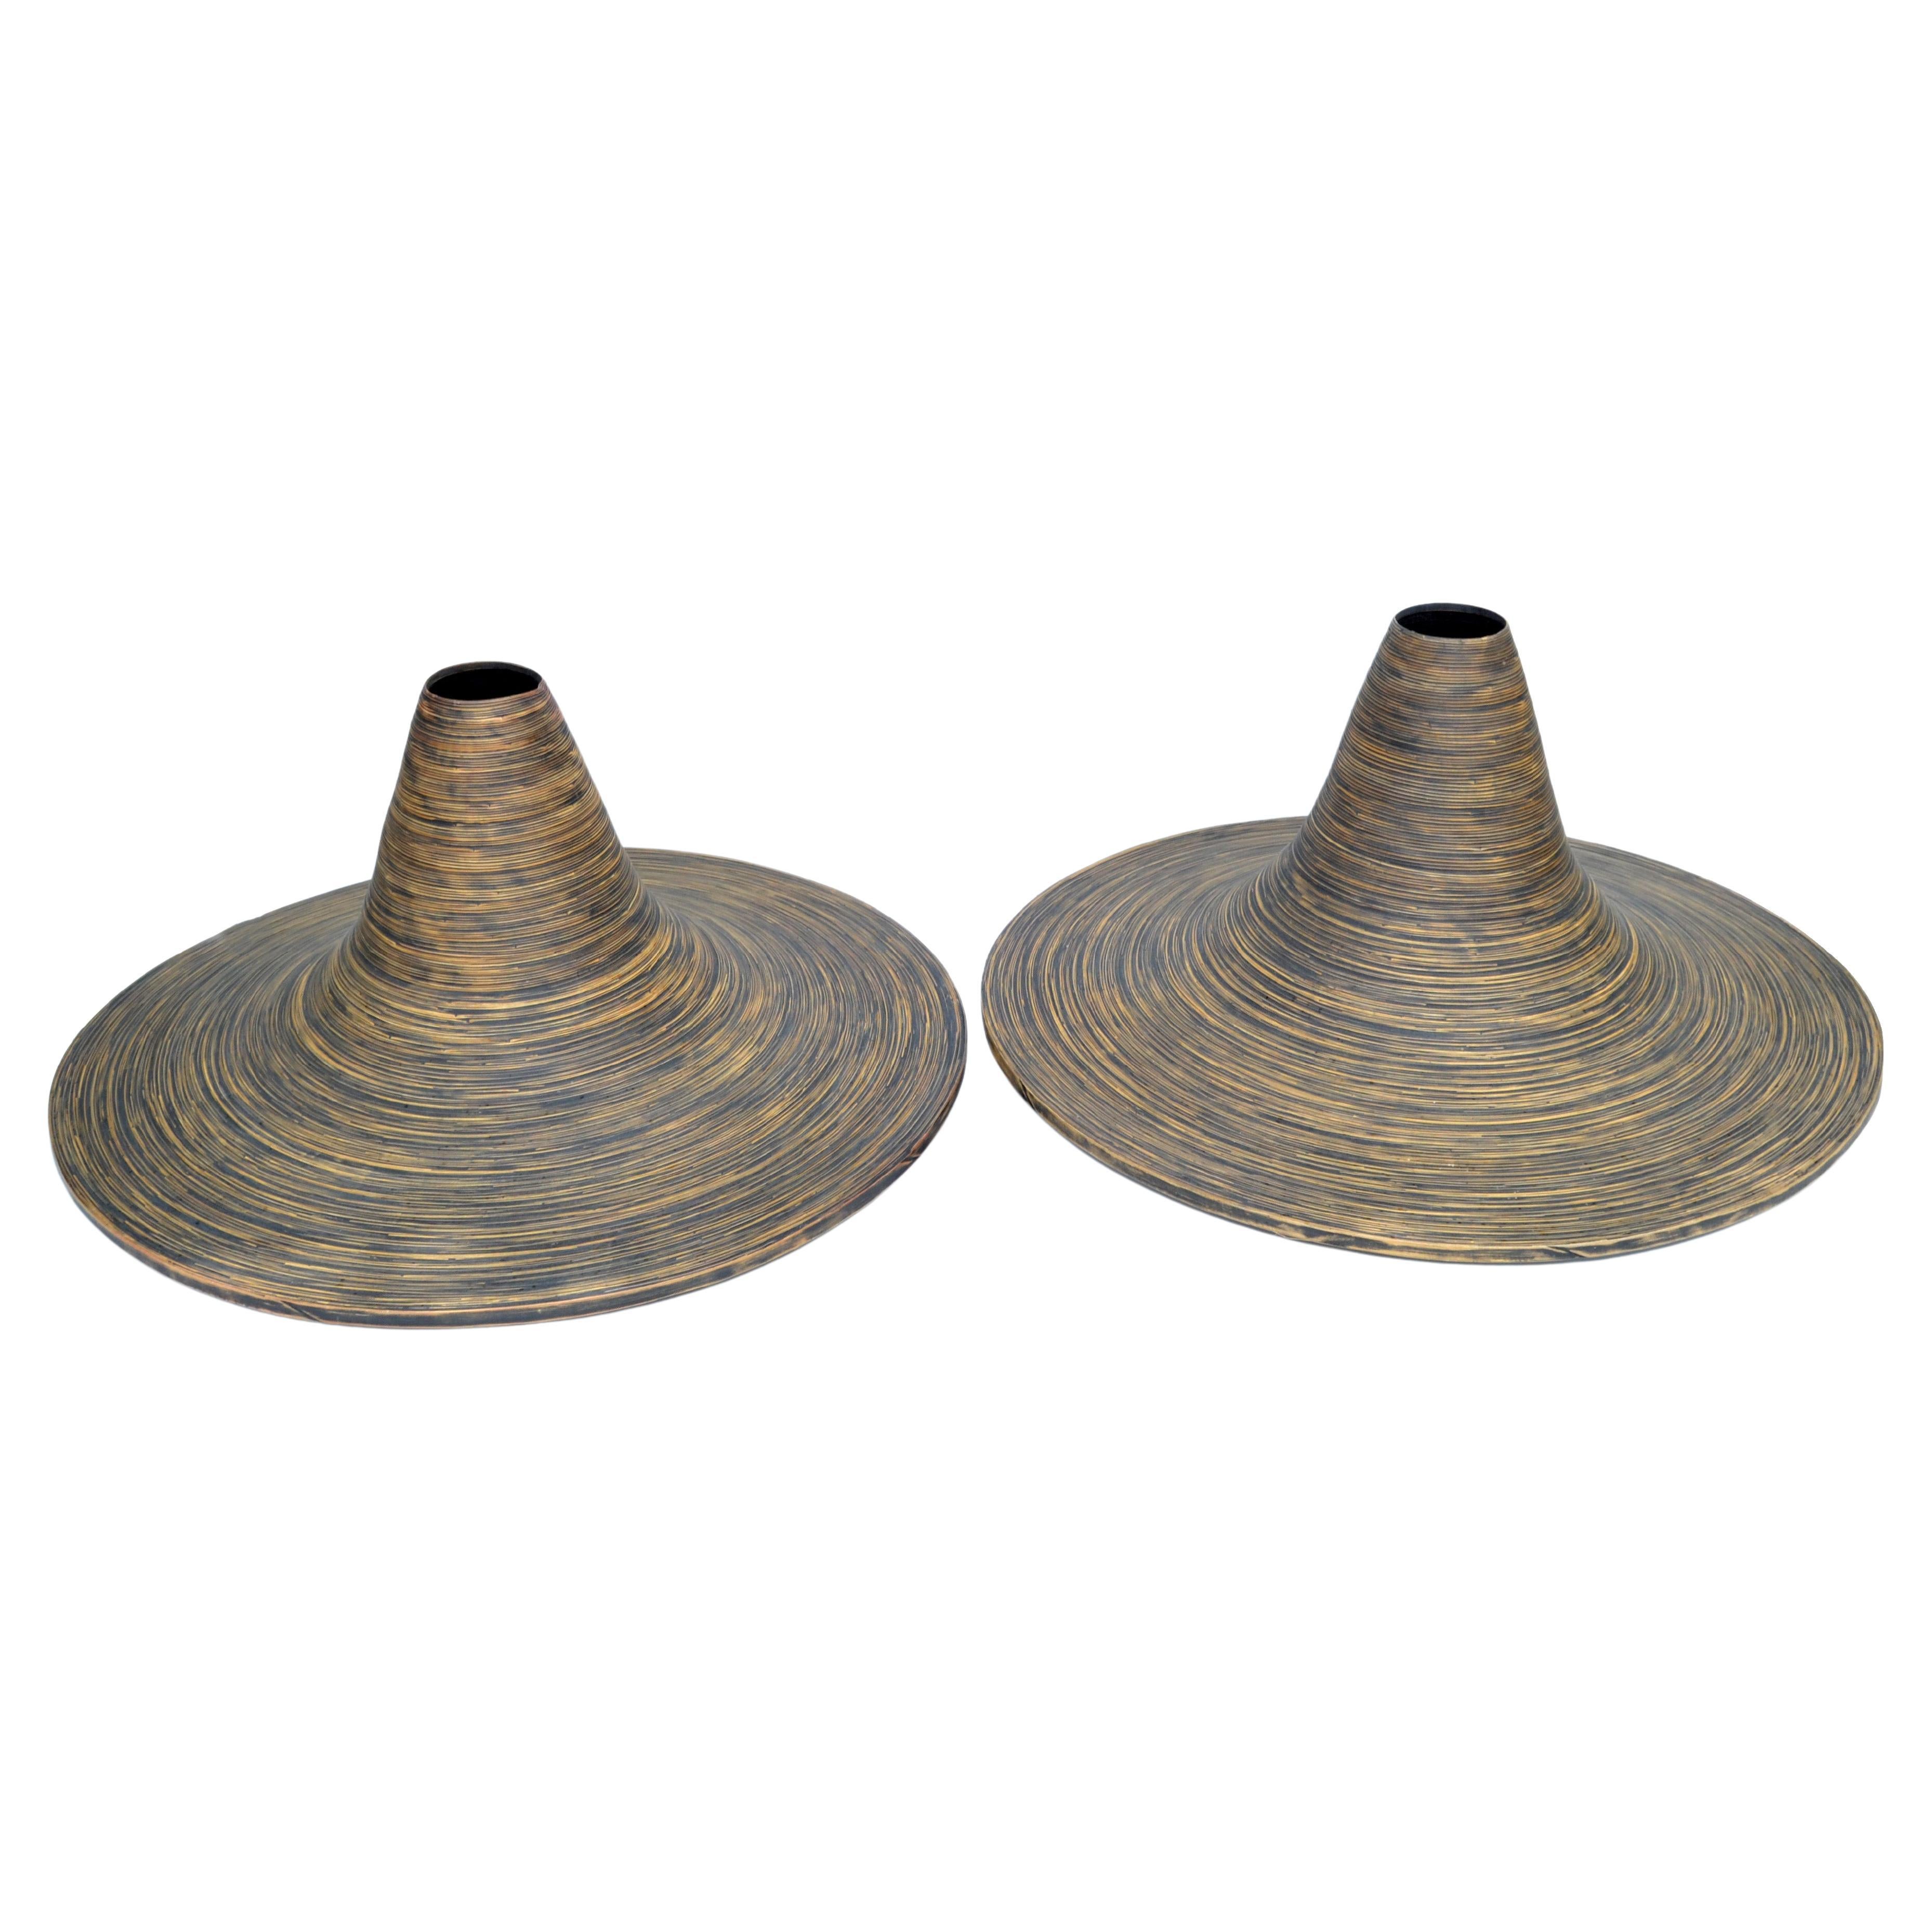 Vintage Indoor Decorative Planters 42 Inches Diameter Swirled Cane Vase, a Pair For Sale